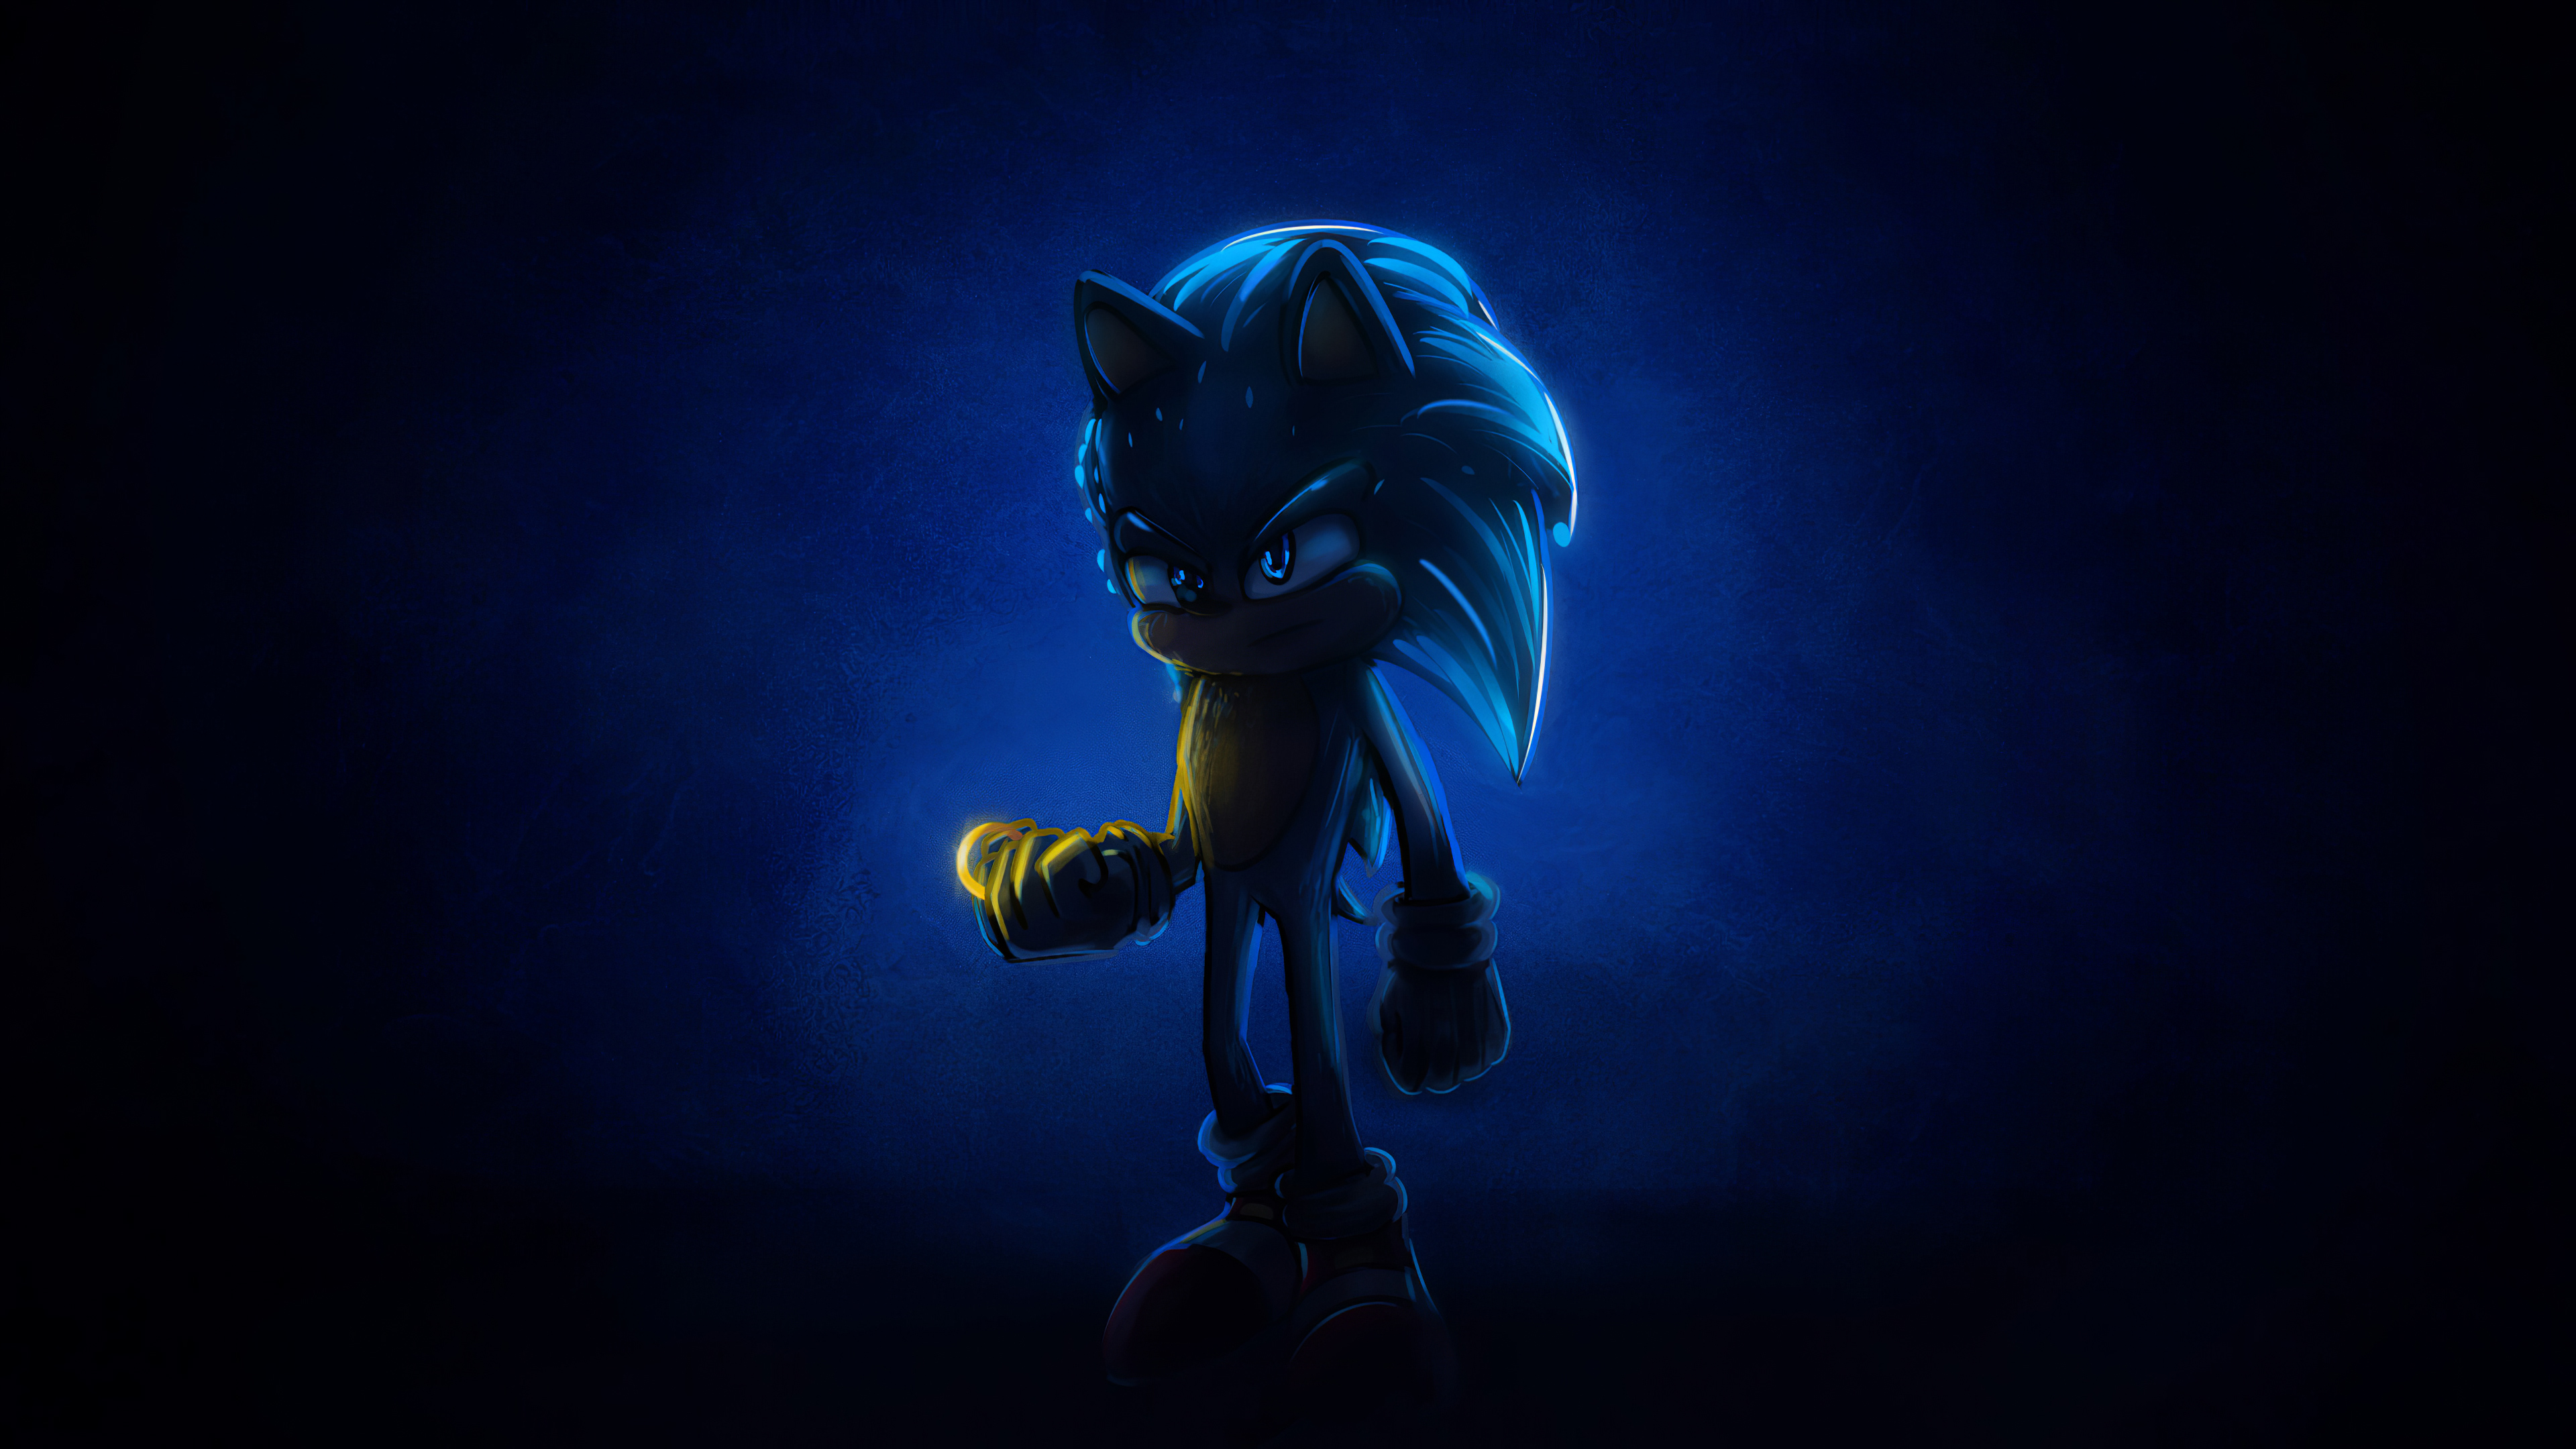 Sonic The Hedgehog4k Artwork, HD Movies, 4k Wallpaper, Image, Background, Photo and Picture